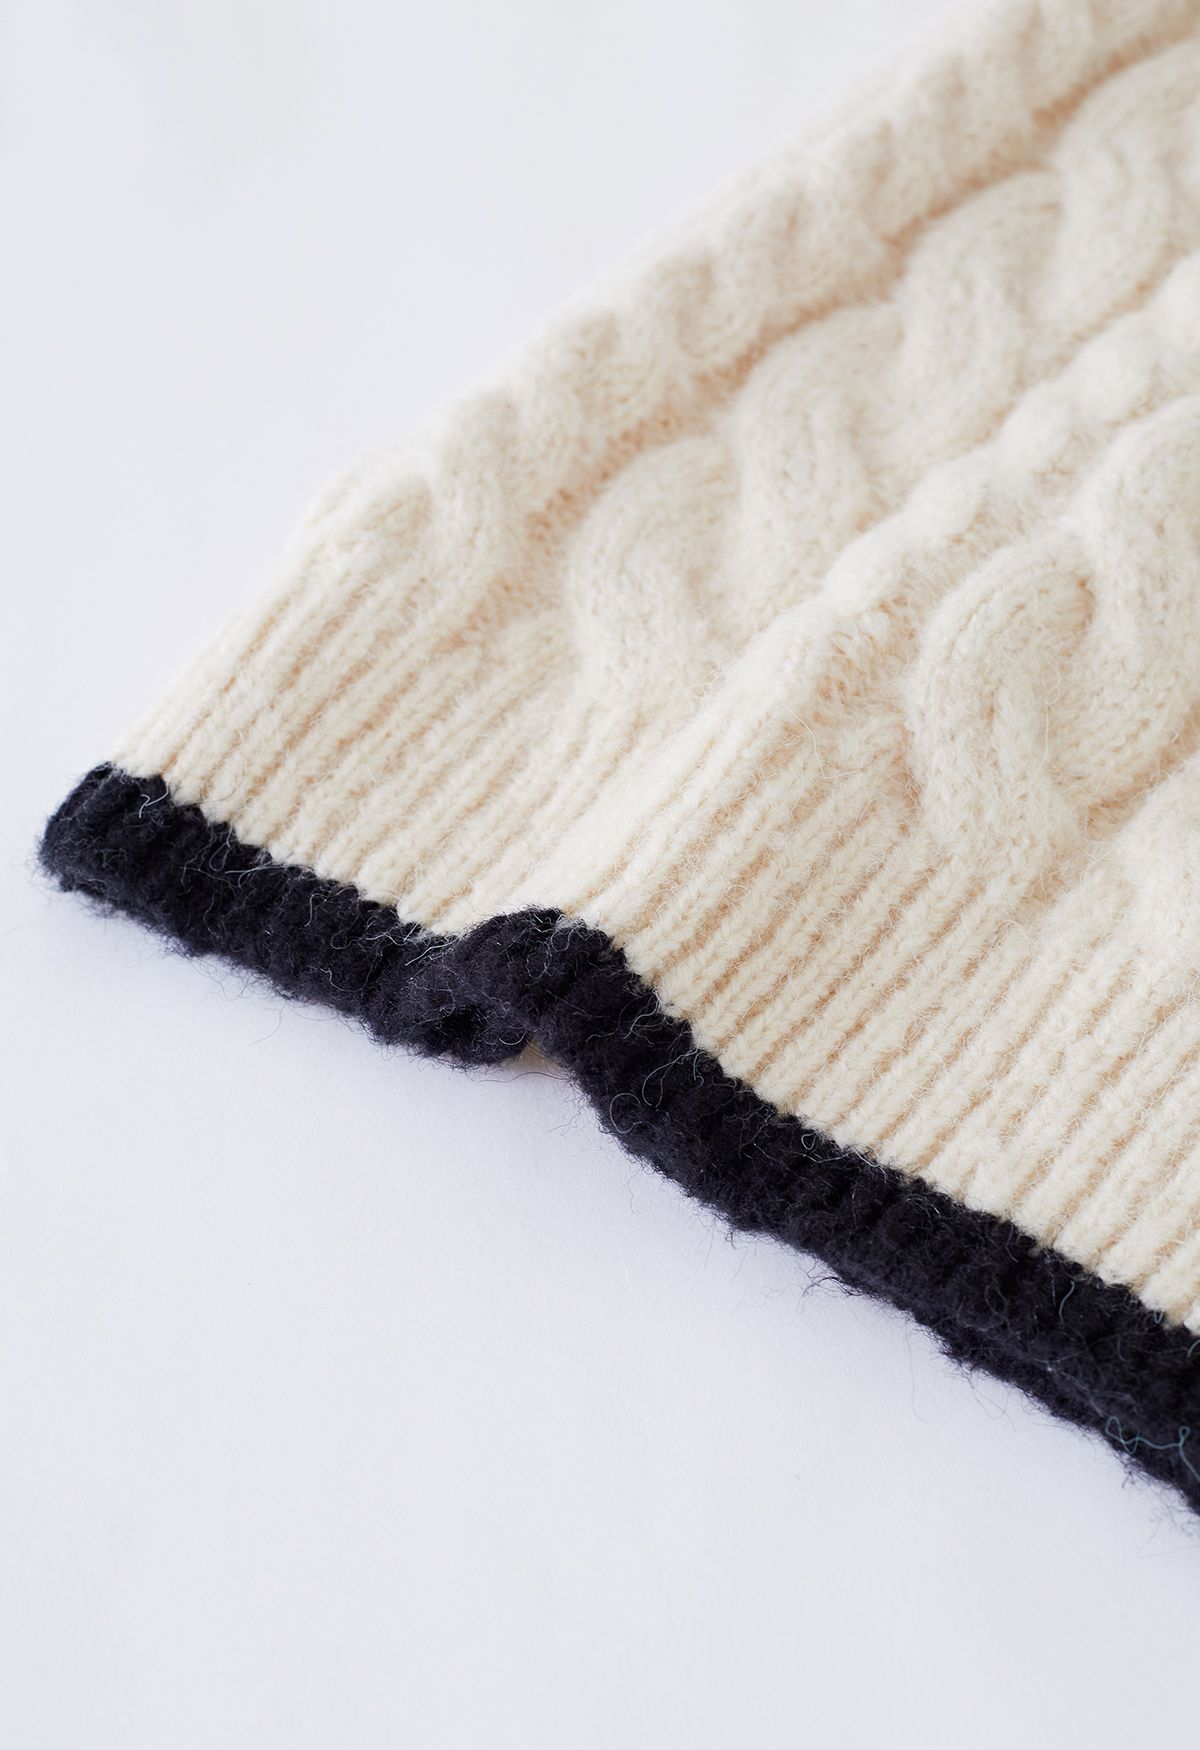 Contrast Edge Cable Knit Longline Sweater